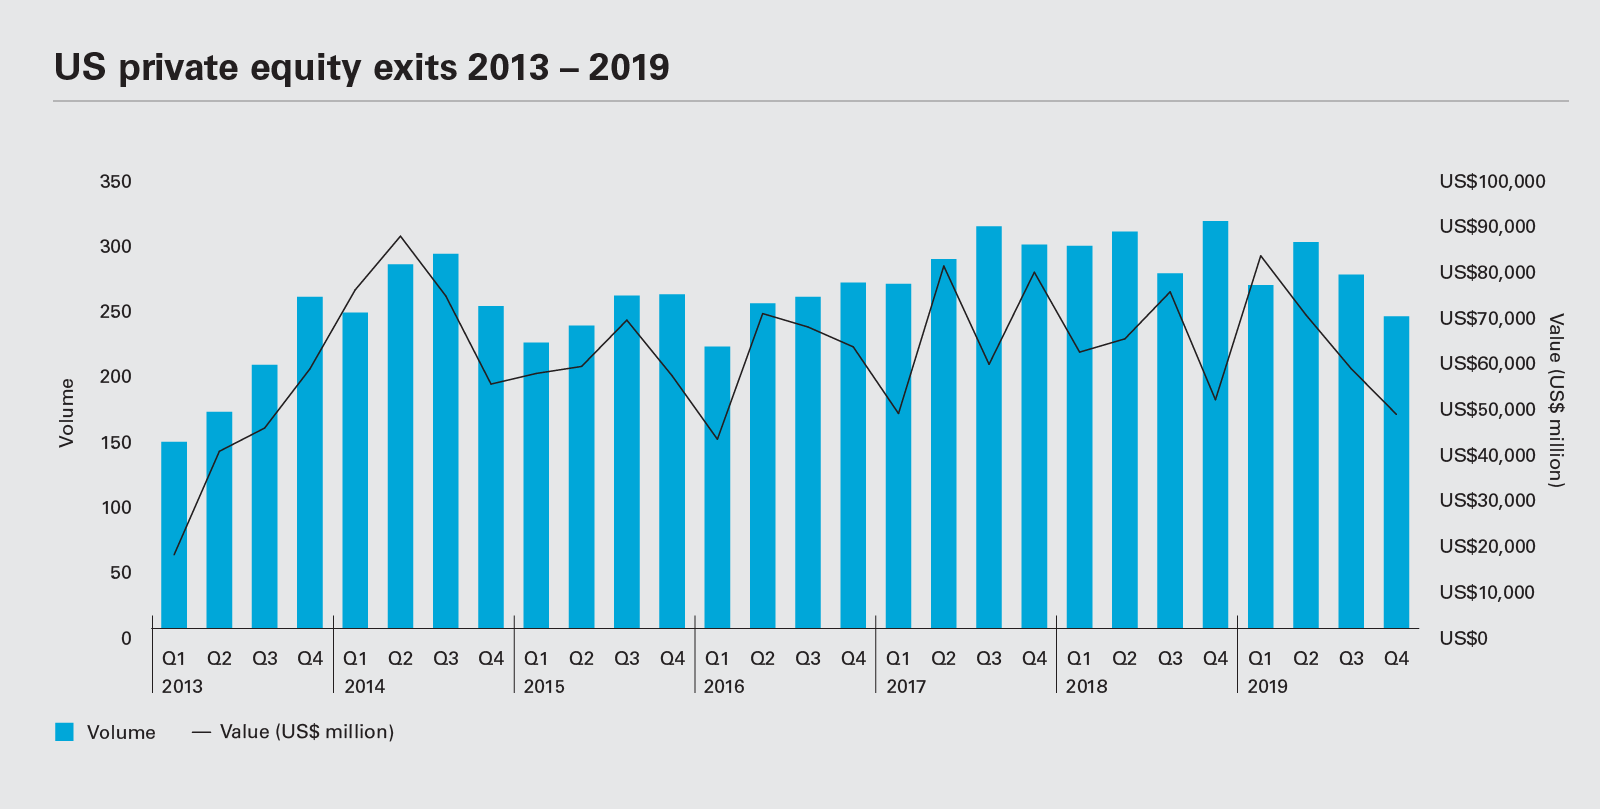 US private equity exits 2013 - 2019